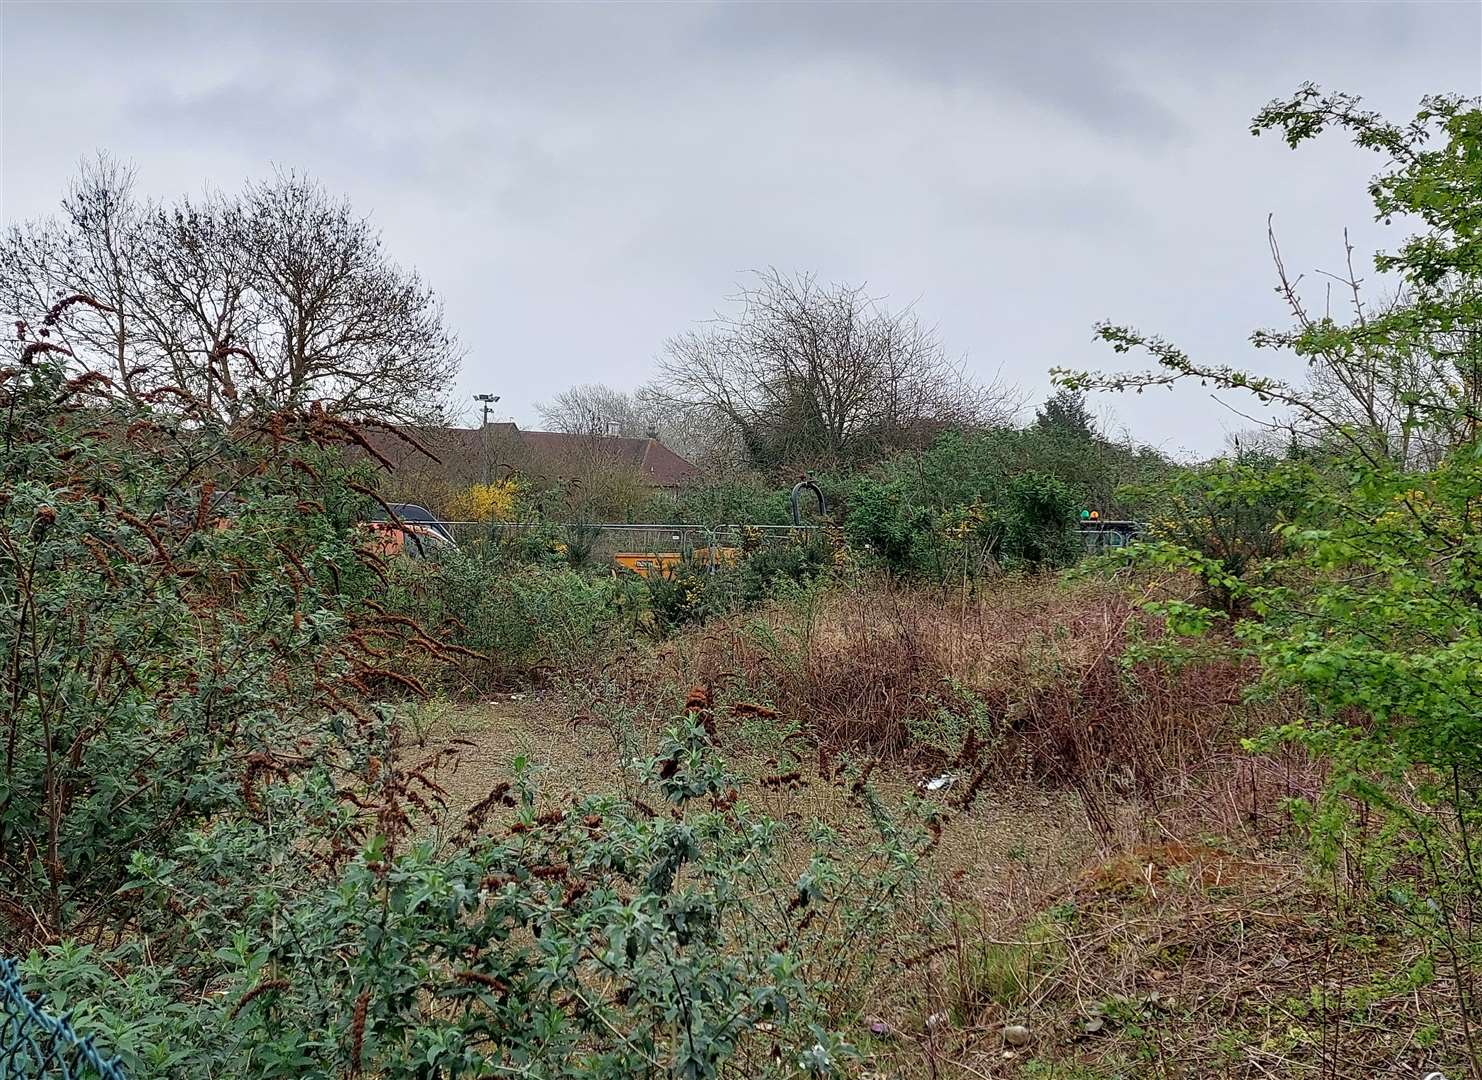 The 1.85-acre site is on A28 Canterbury Road